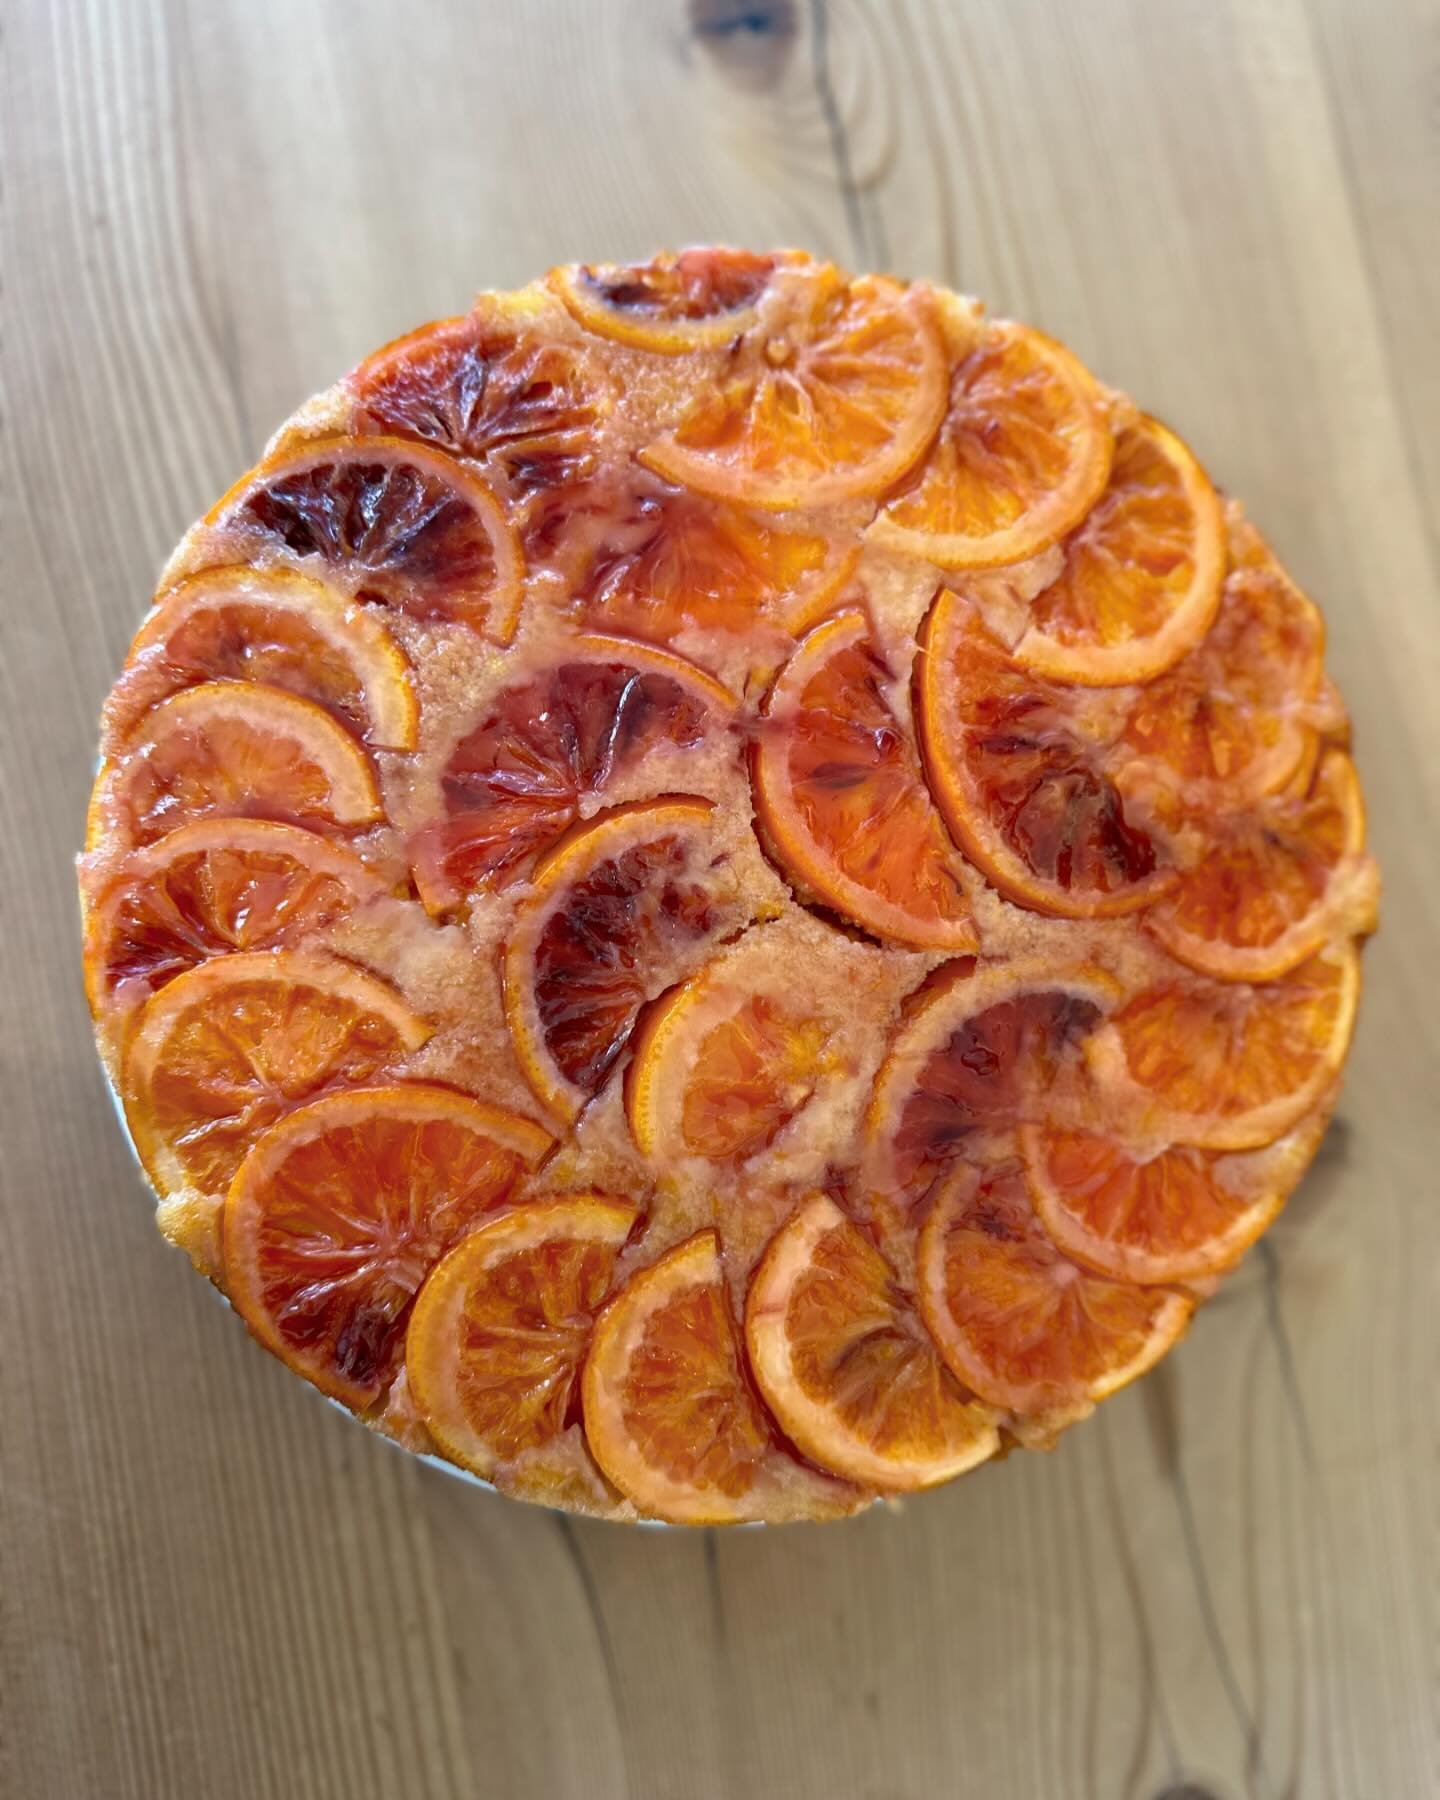 Our blood orange olive oil cake is back!  Come by and enjoy a slice while it lasts. 🥰🍊
Pre-orders of a whole cake are available with 48 hours notice. 🧡😋